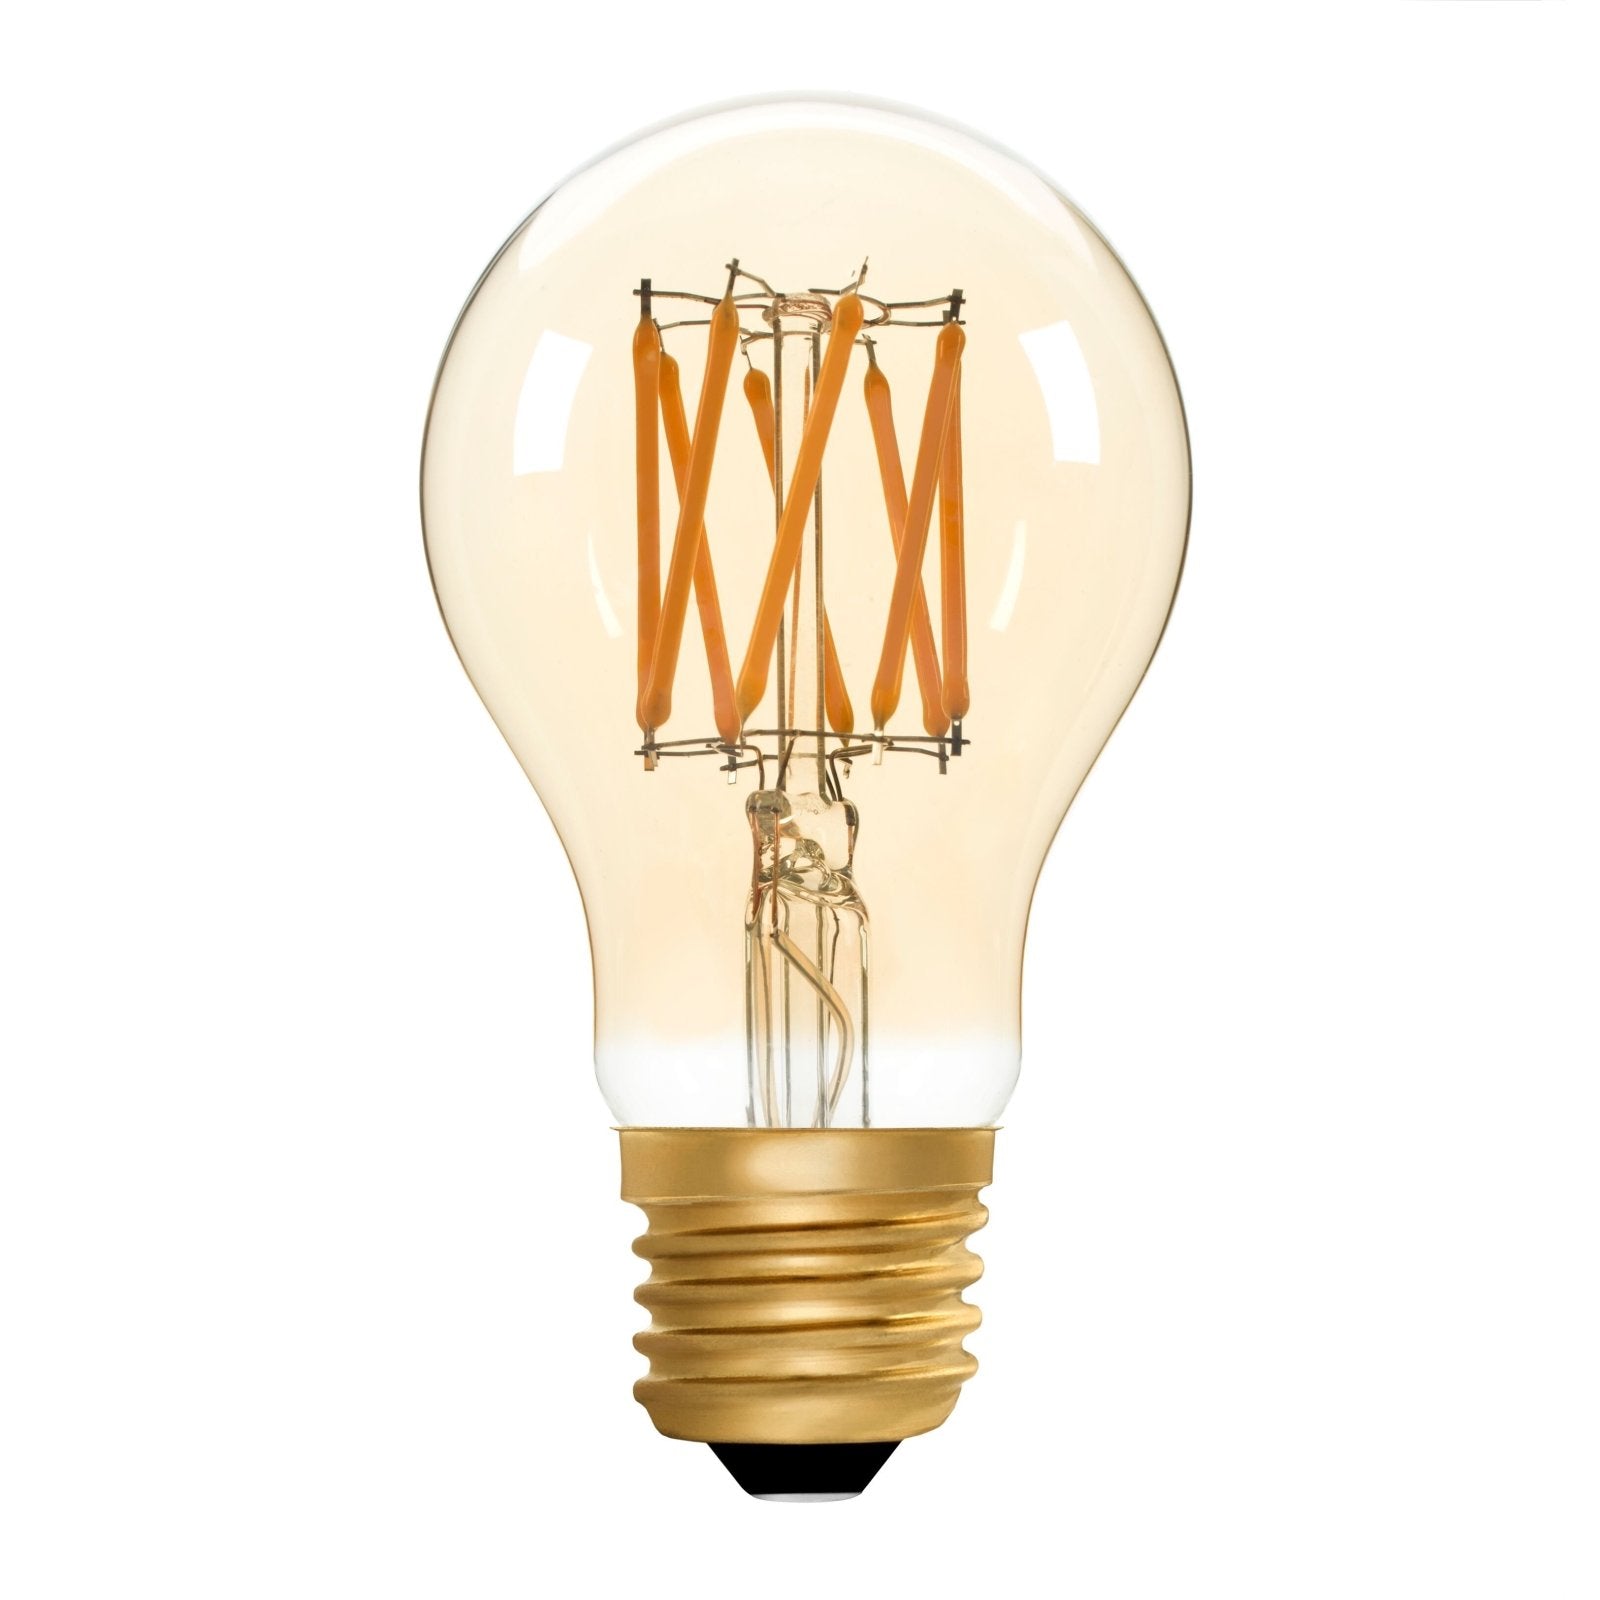 GLS A60 Amber 6W E27 2200K - LED Lamp from RETROLIGHT. Made by Zico Lighting.